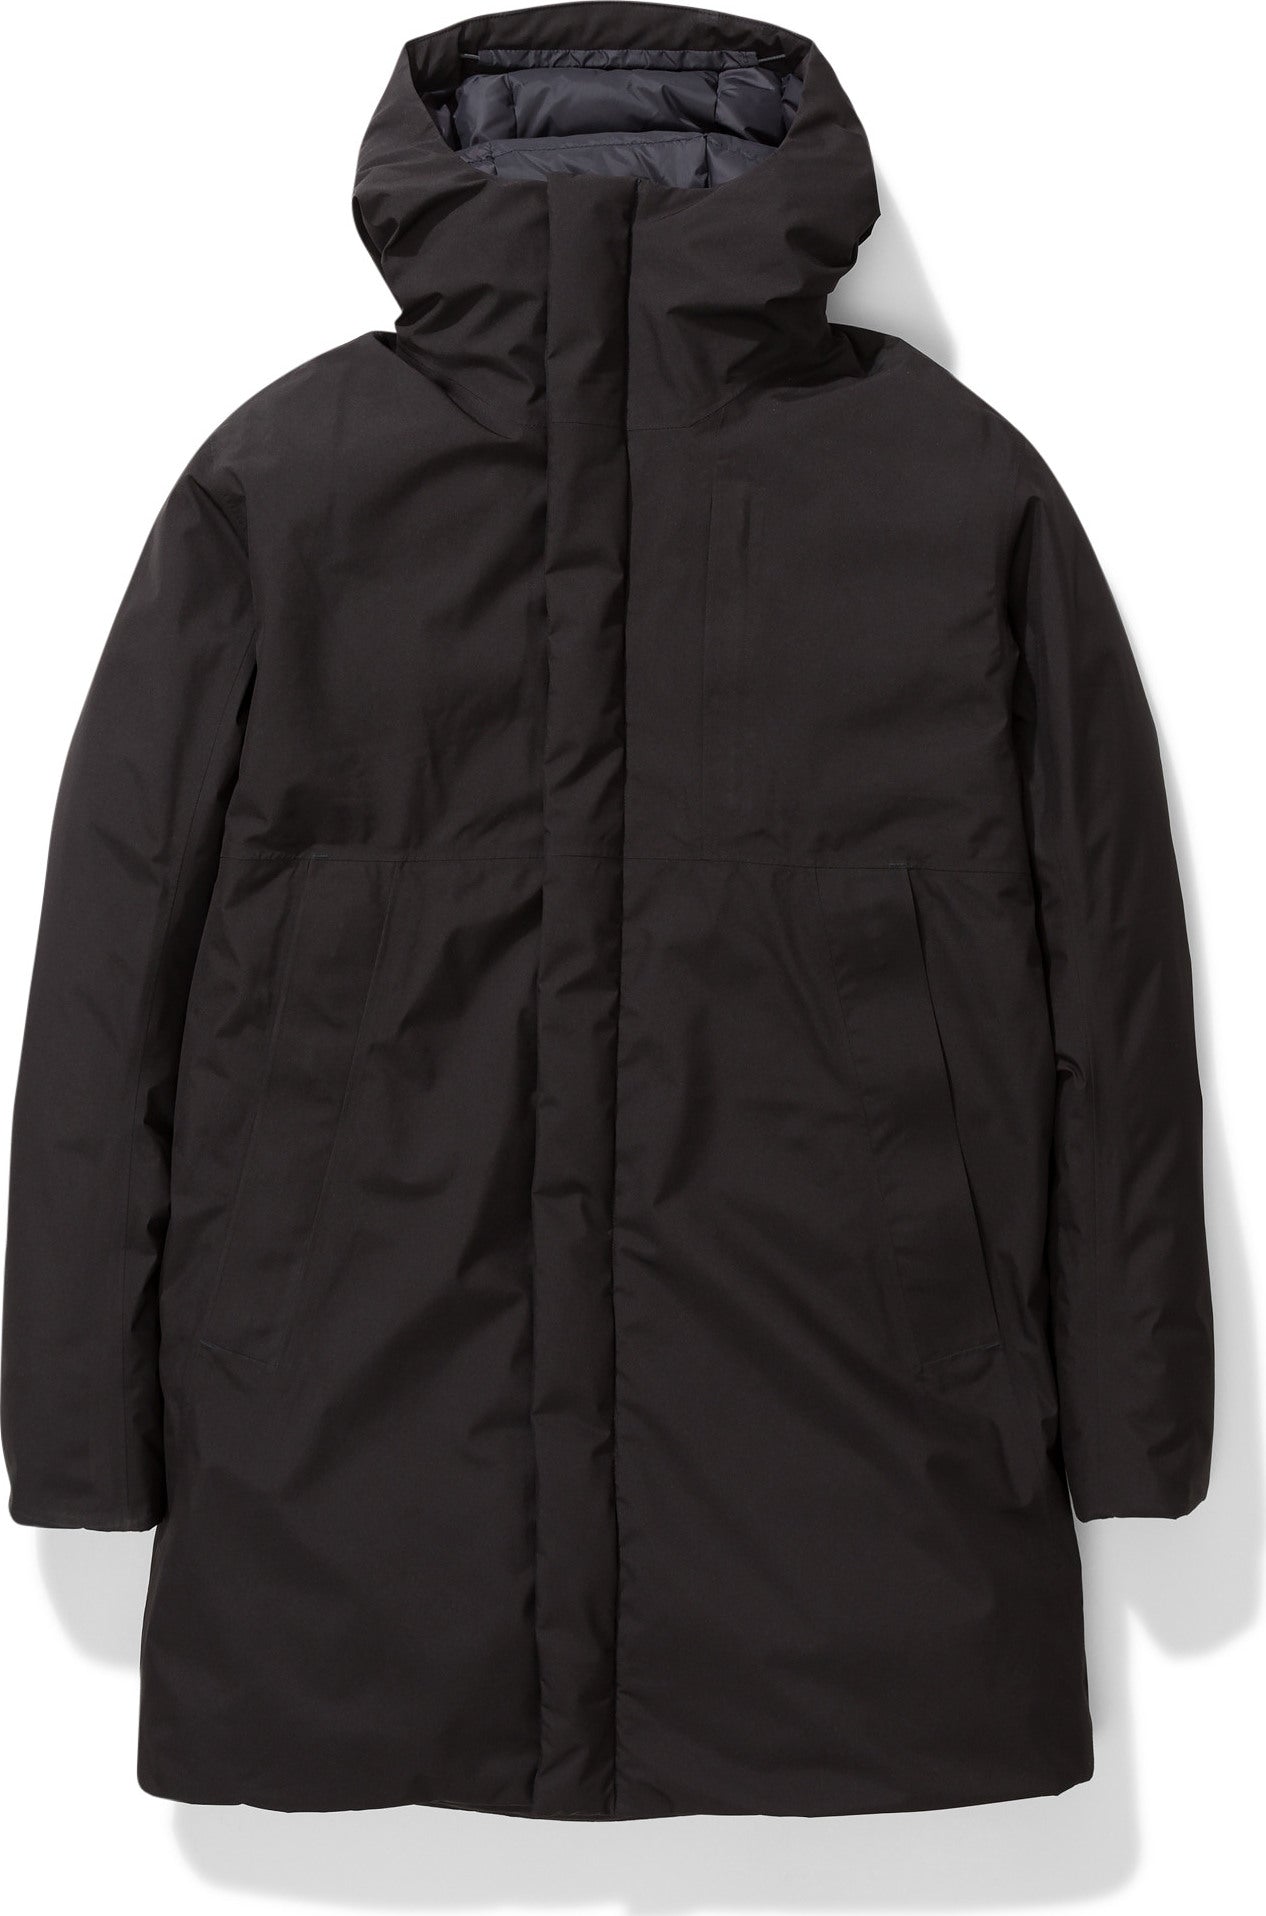 Norse Projects Oda Gore-Tex Down Jacket - Women's | Altitude Sports